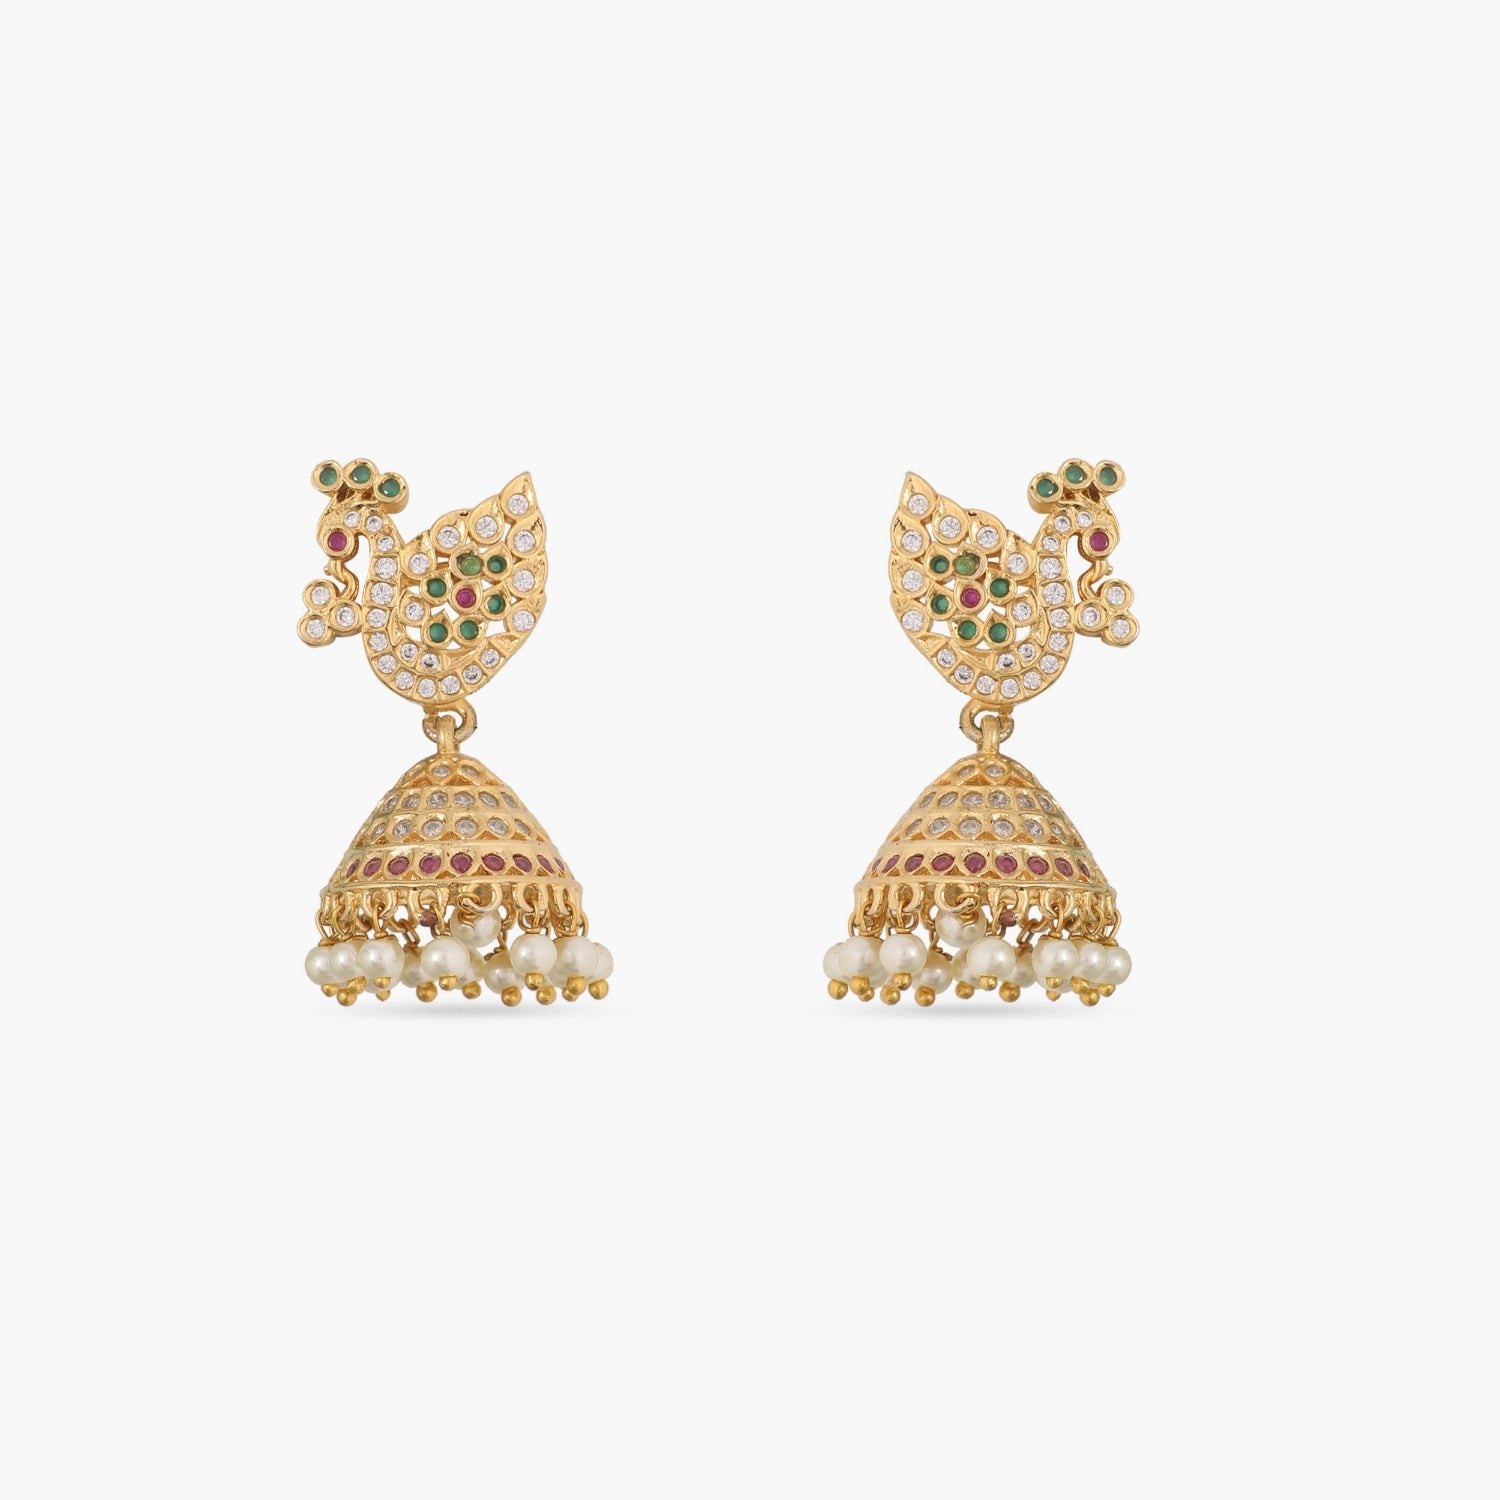 Gold tone white stone south Indian style earrings dj-41756 – dreamjwell